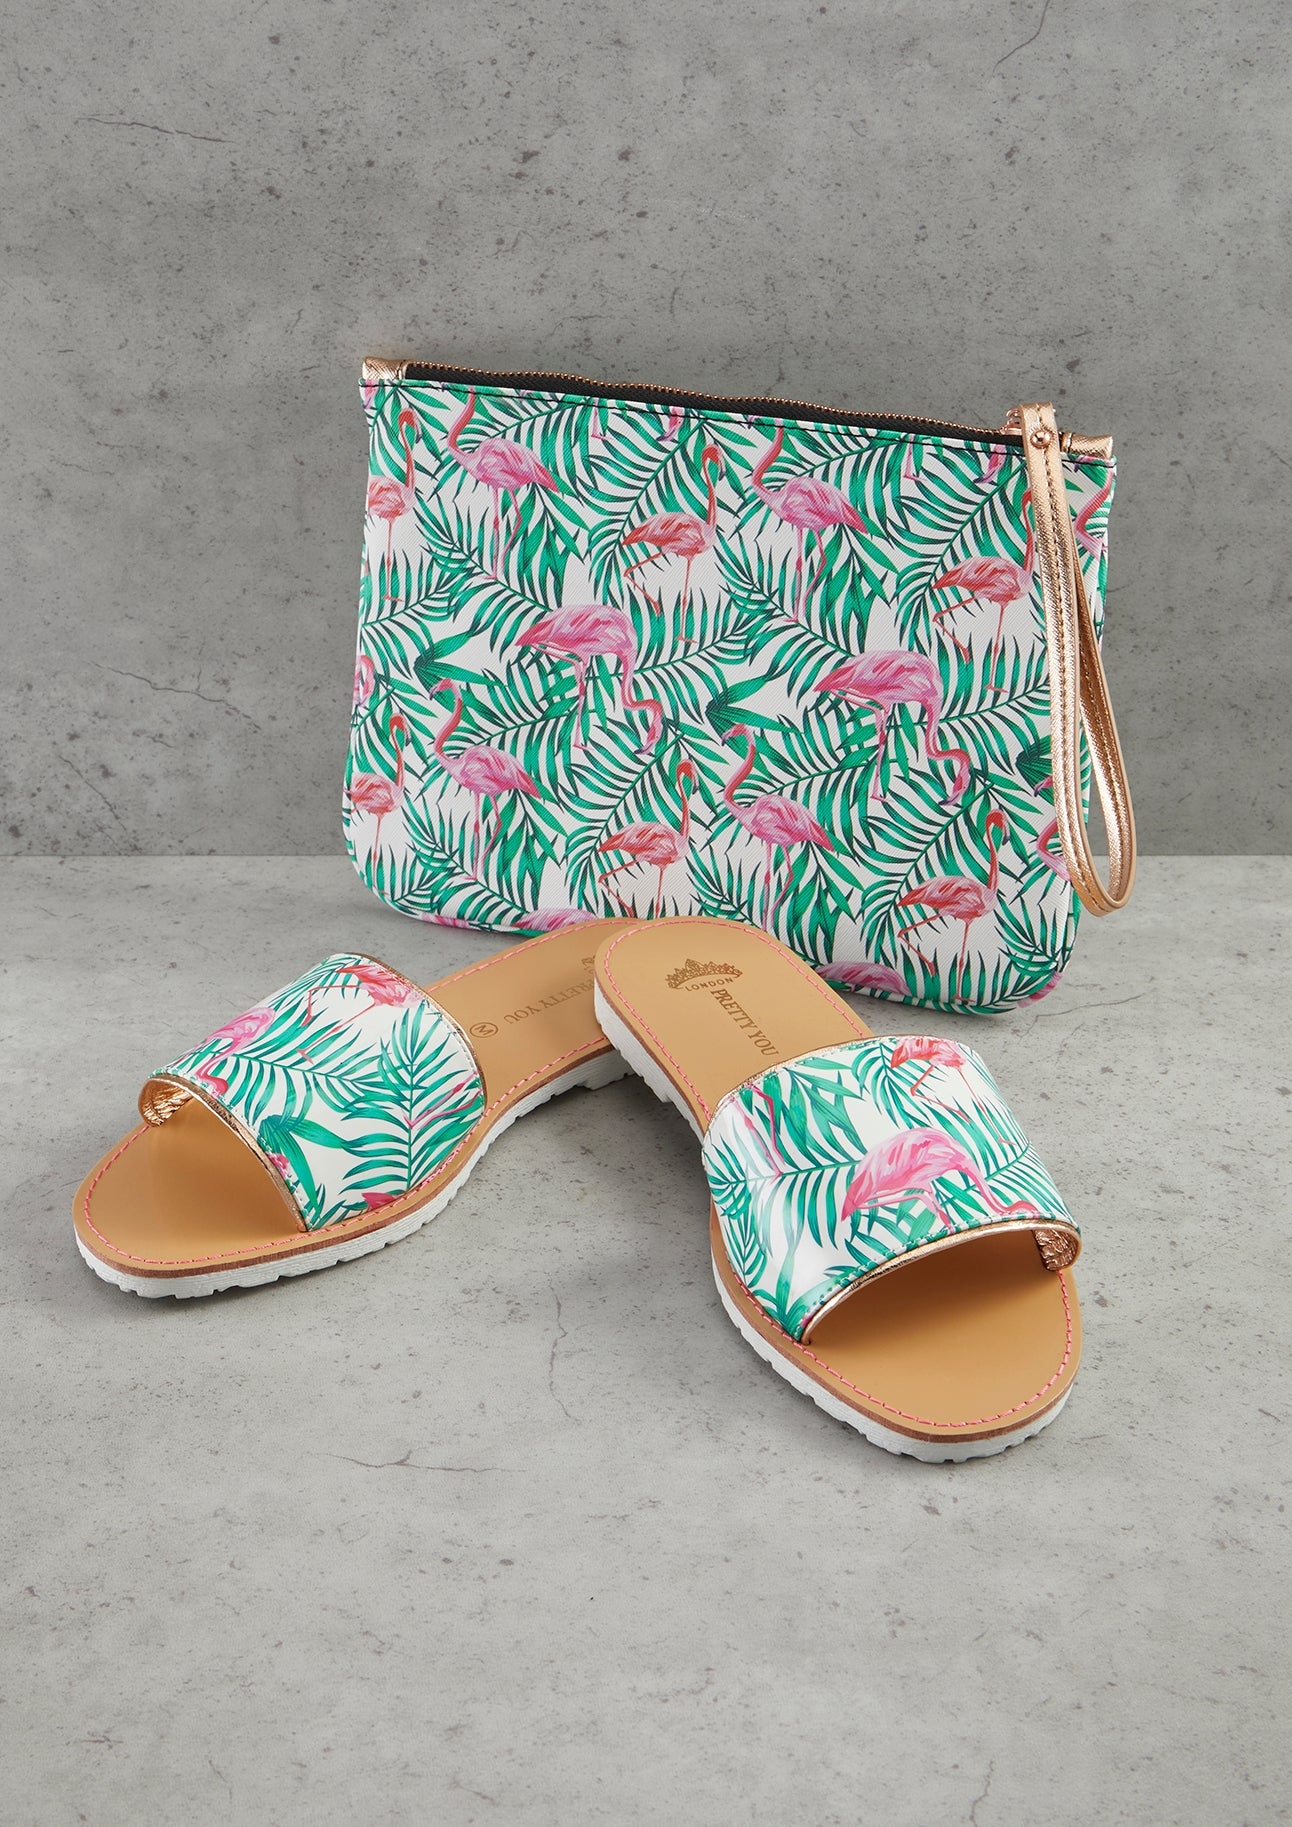 Womens Flamingo Print Sandal and Clutch Set from Pretty You London XL / Tropical